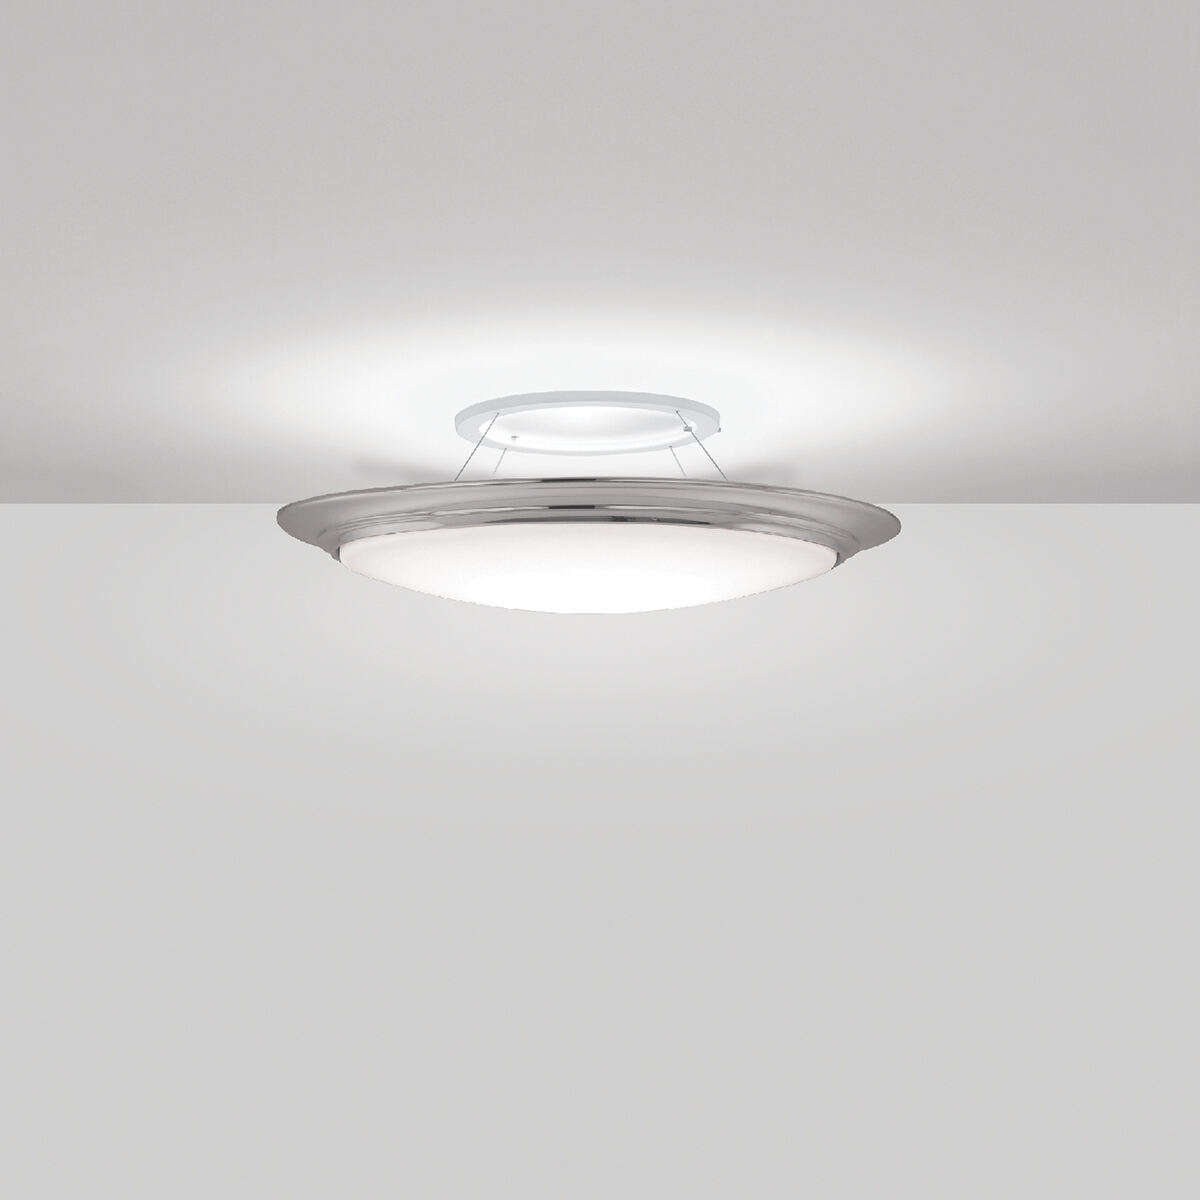 Ovation CM1708 Ceiling mount light fixture with the illusion of a pendant